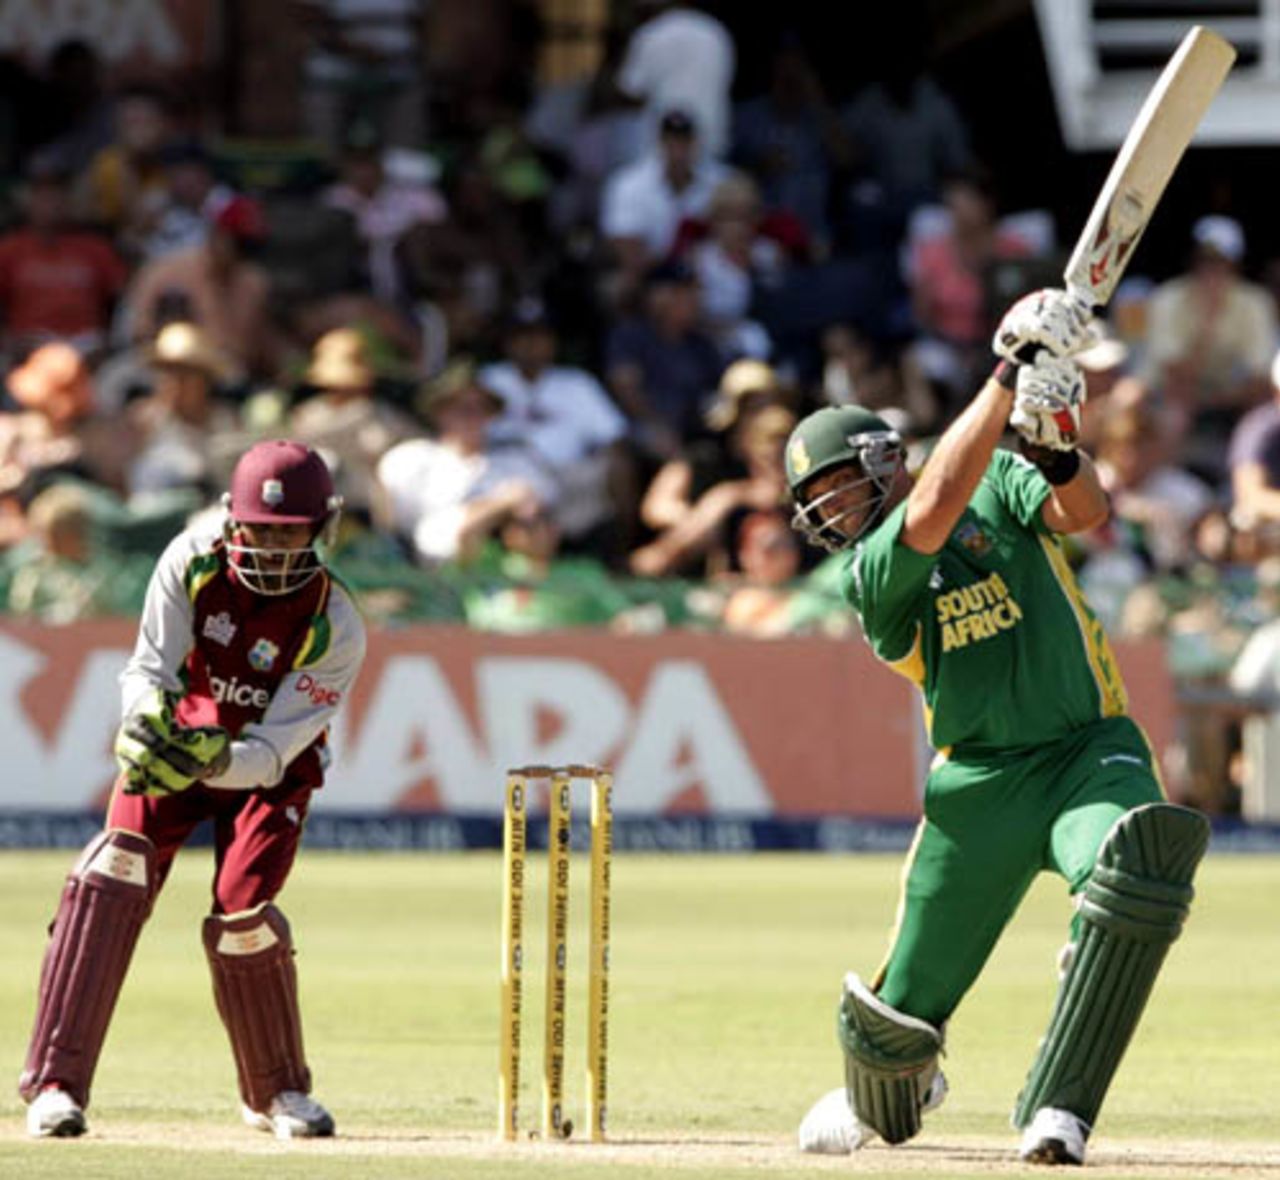 Jacques Kallis drills one through the covers, South Africa v West Indies, 3rd ODI, Port Elizabeth, January 27, 2008